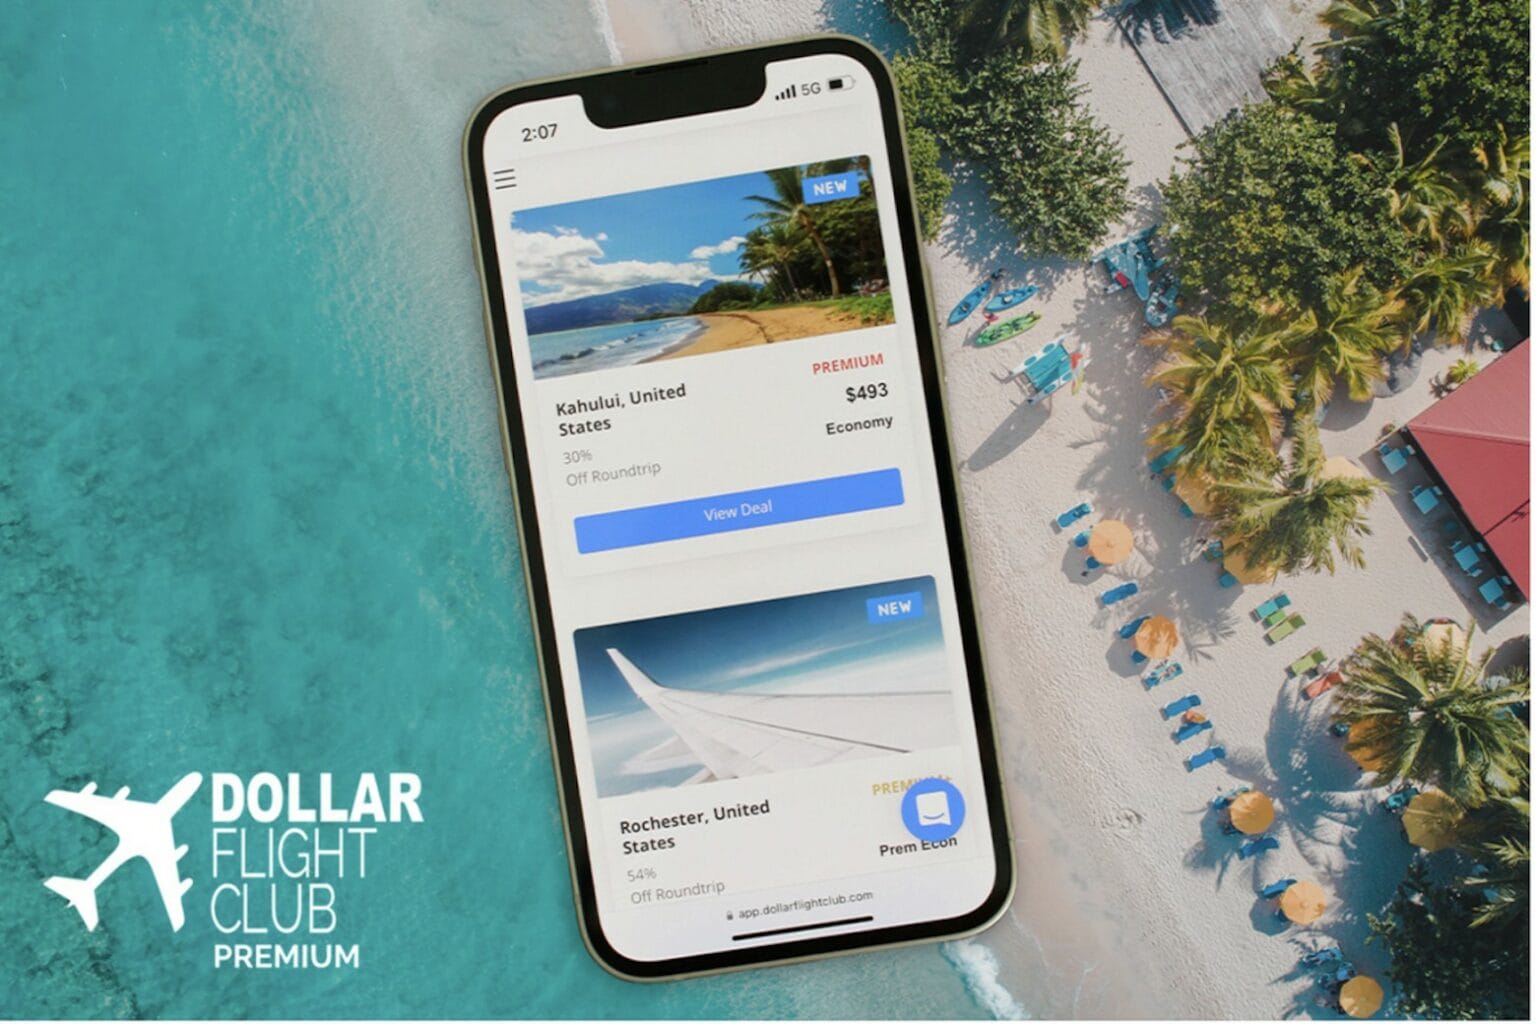 Save on your summer vacation before Prime Day with a top-rated Dollar Flight Club membership.